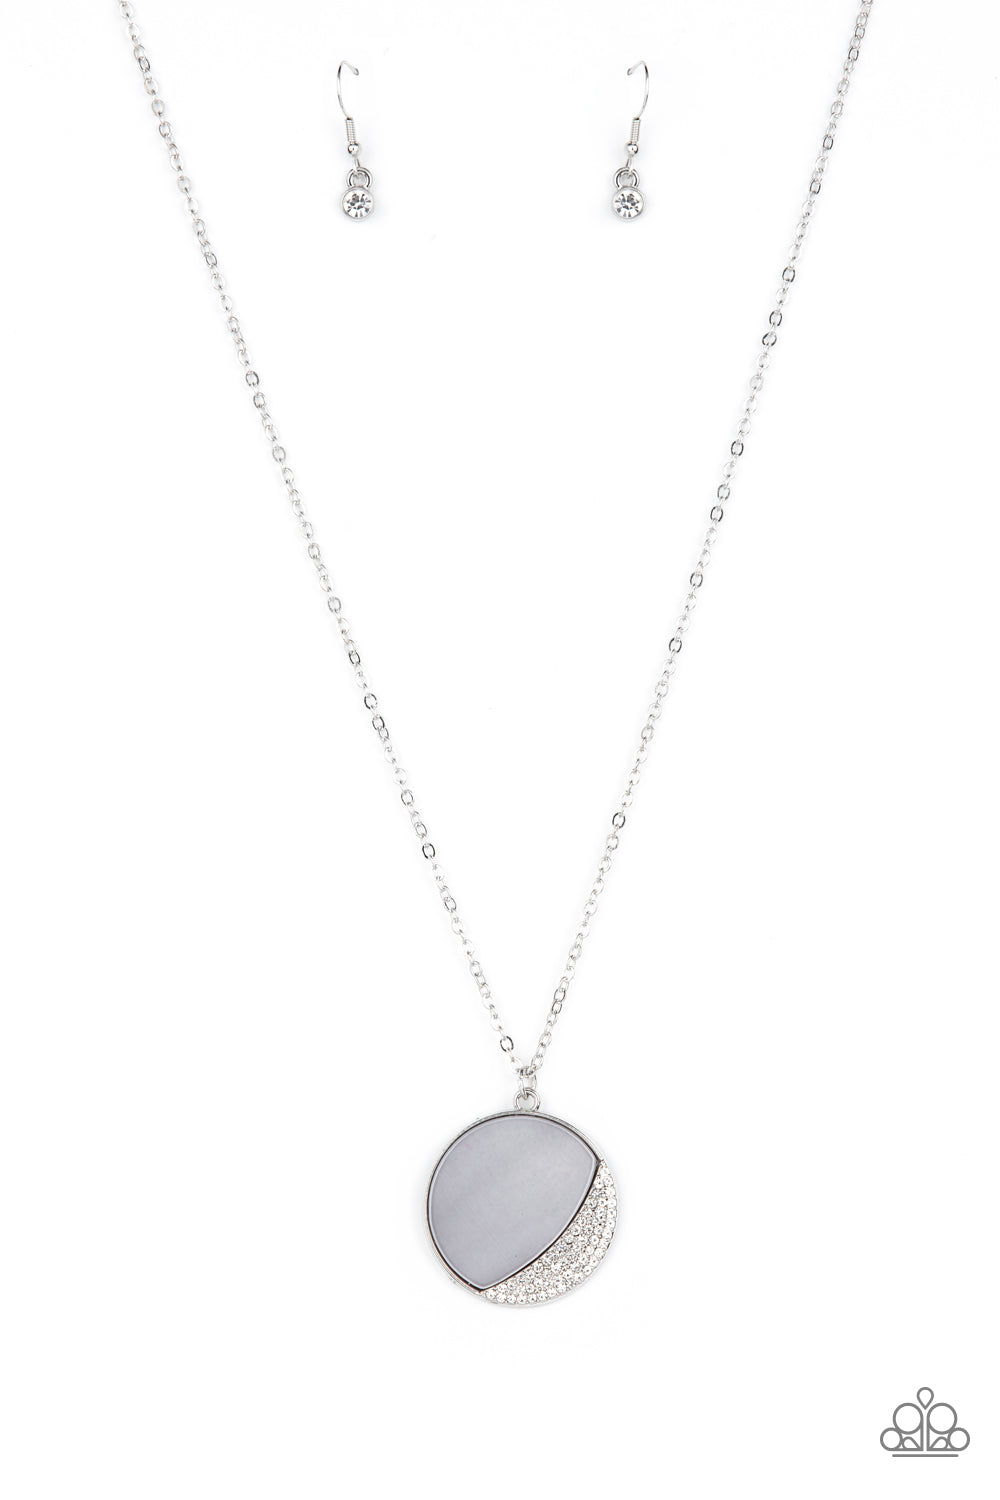 Paparazzi Necklace - Oceanic Eclipse - Silver